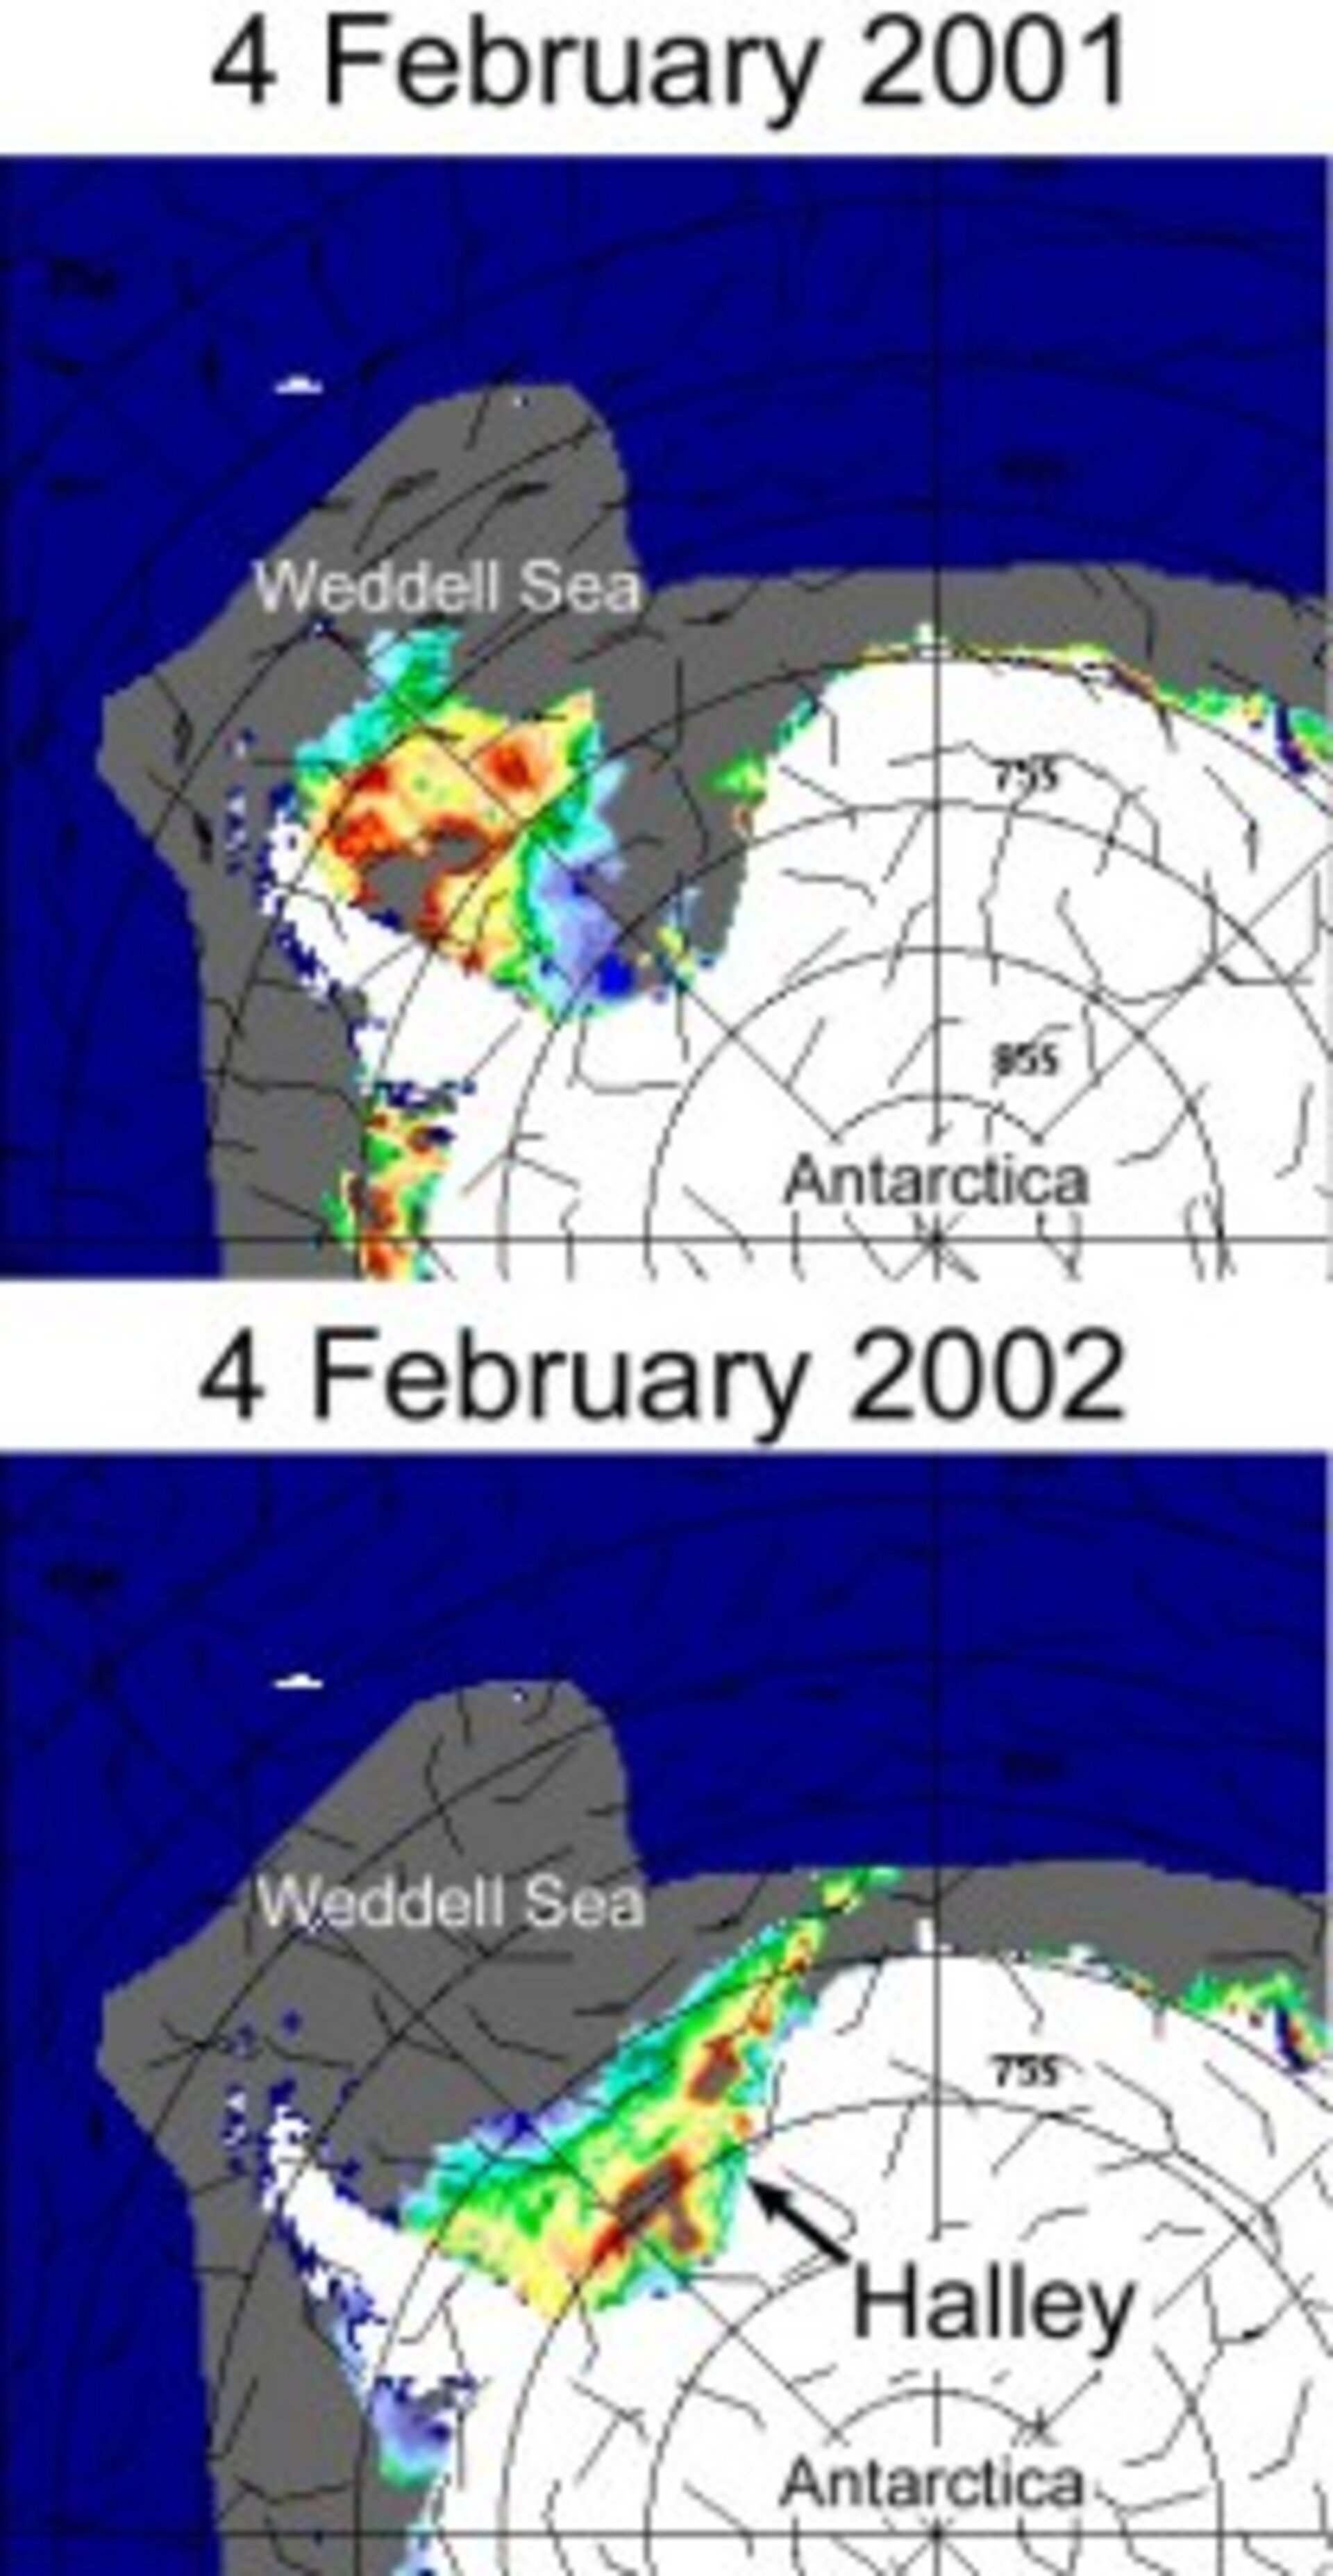 Scatterometer images comparing summer pack-ice conditions in early February 2001 and 2002